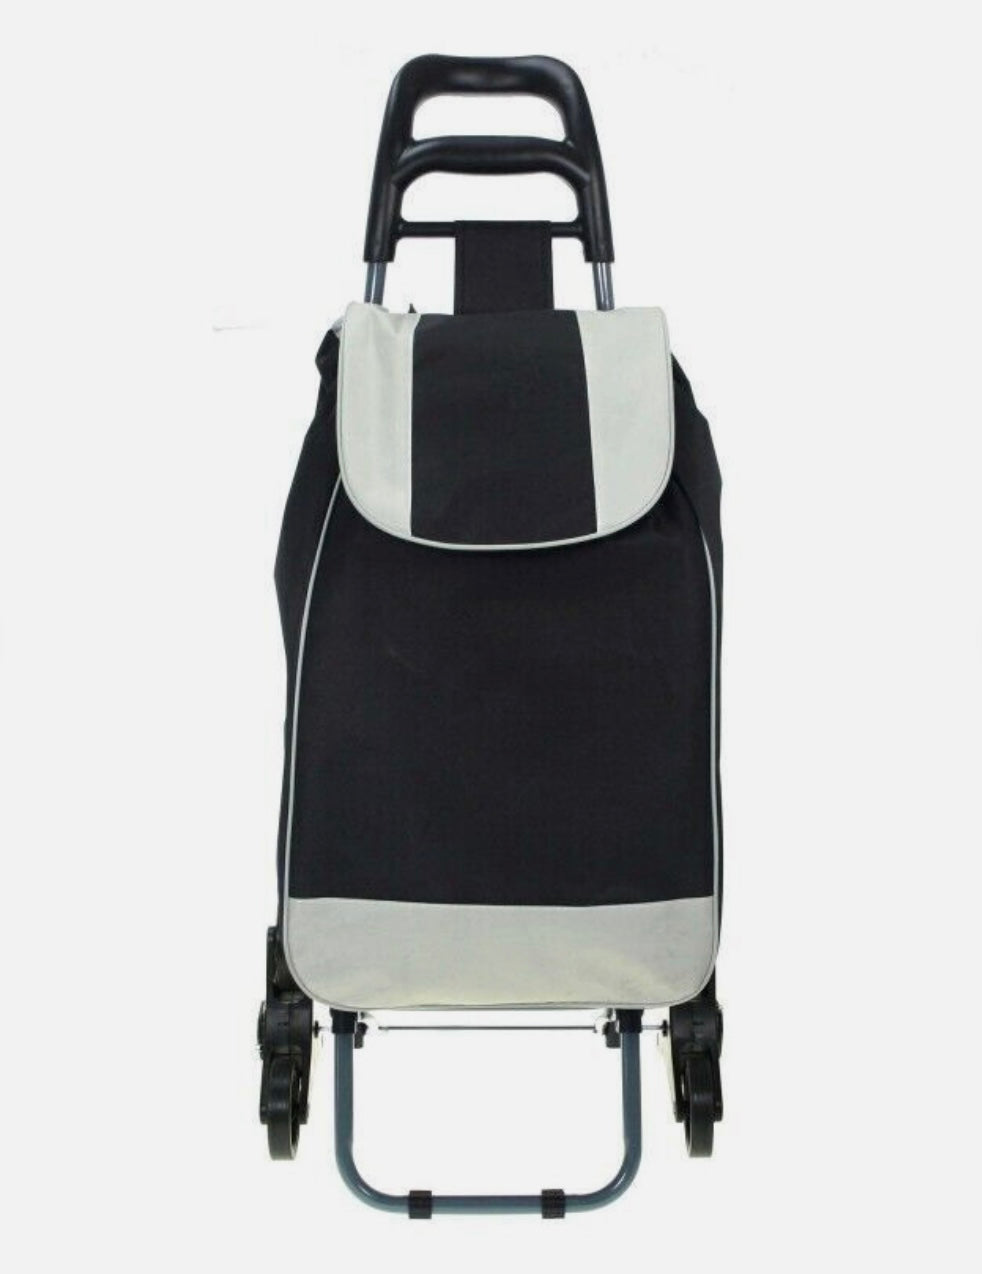 Wheeled Foldable Grocery Shopping Trolley Bag | Rolling Shopping Cart